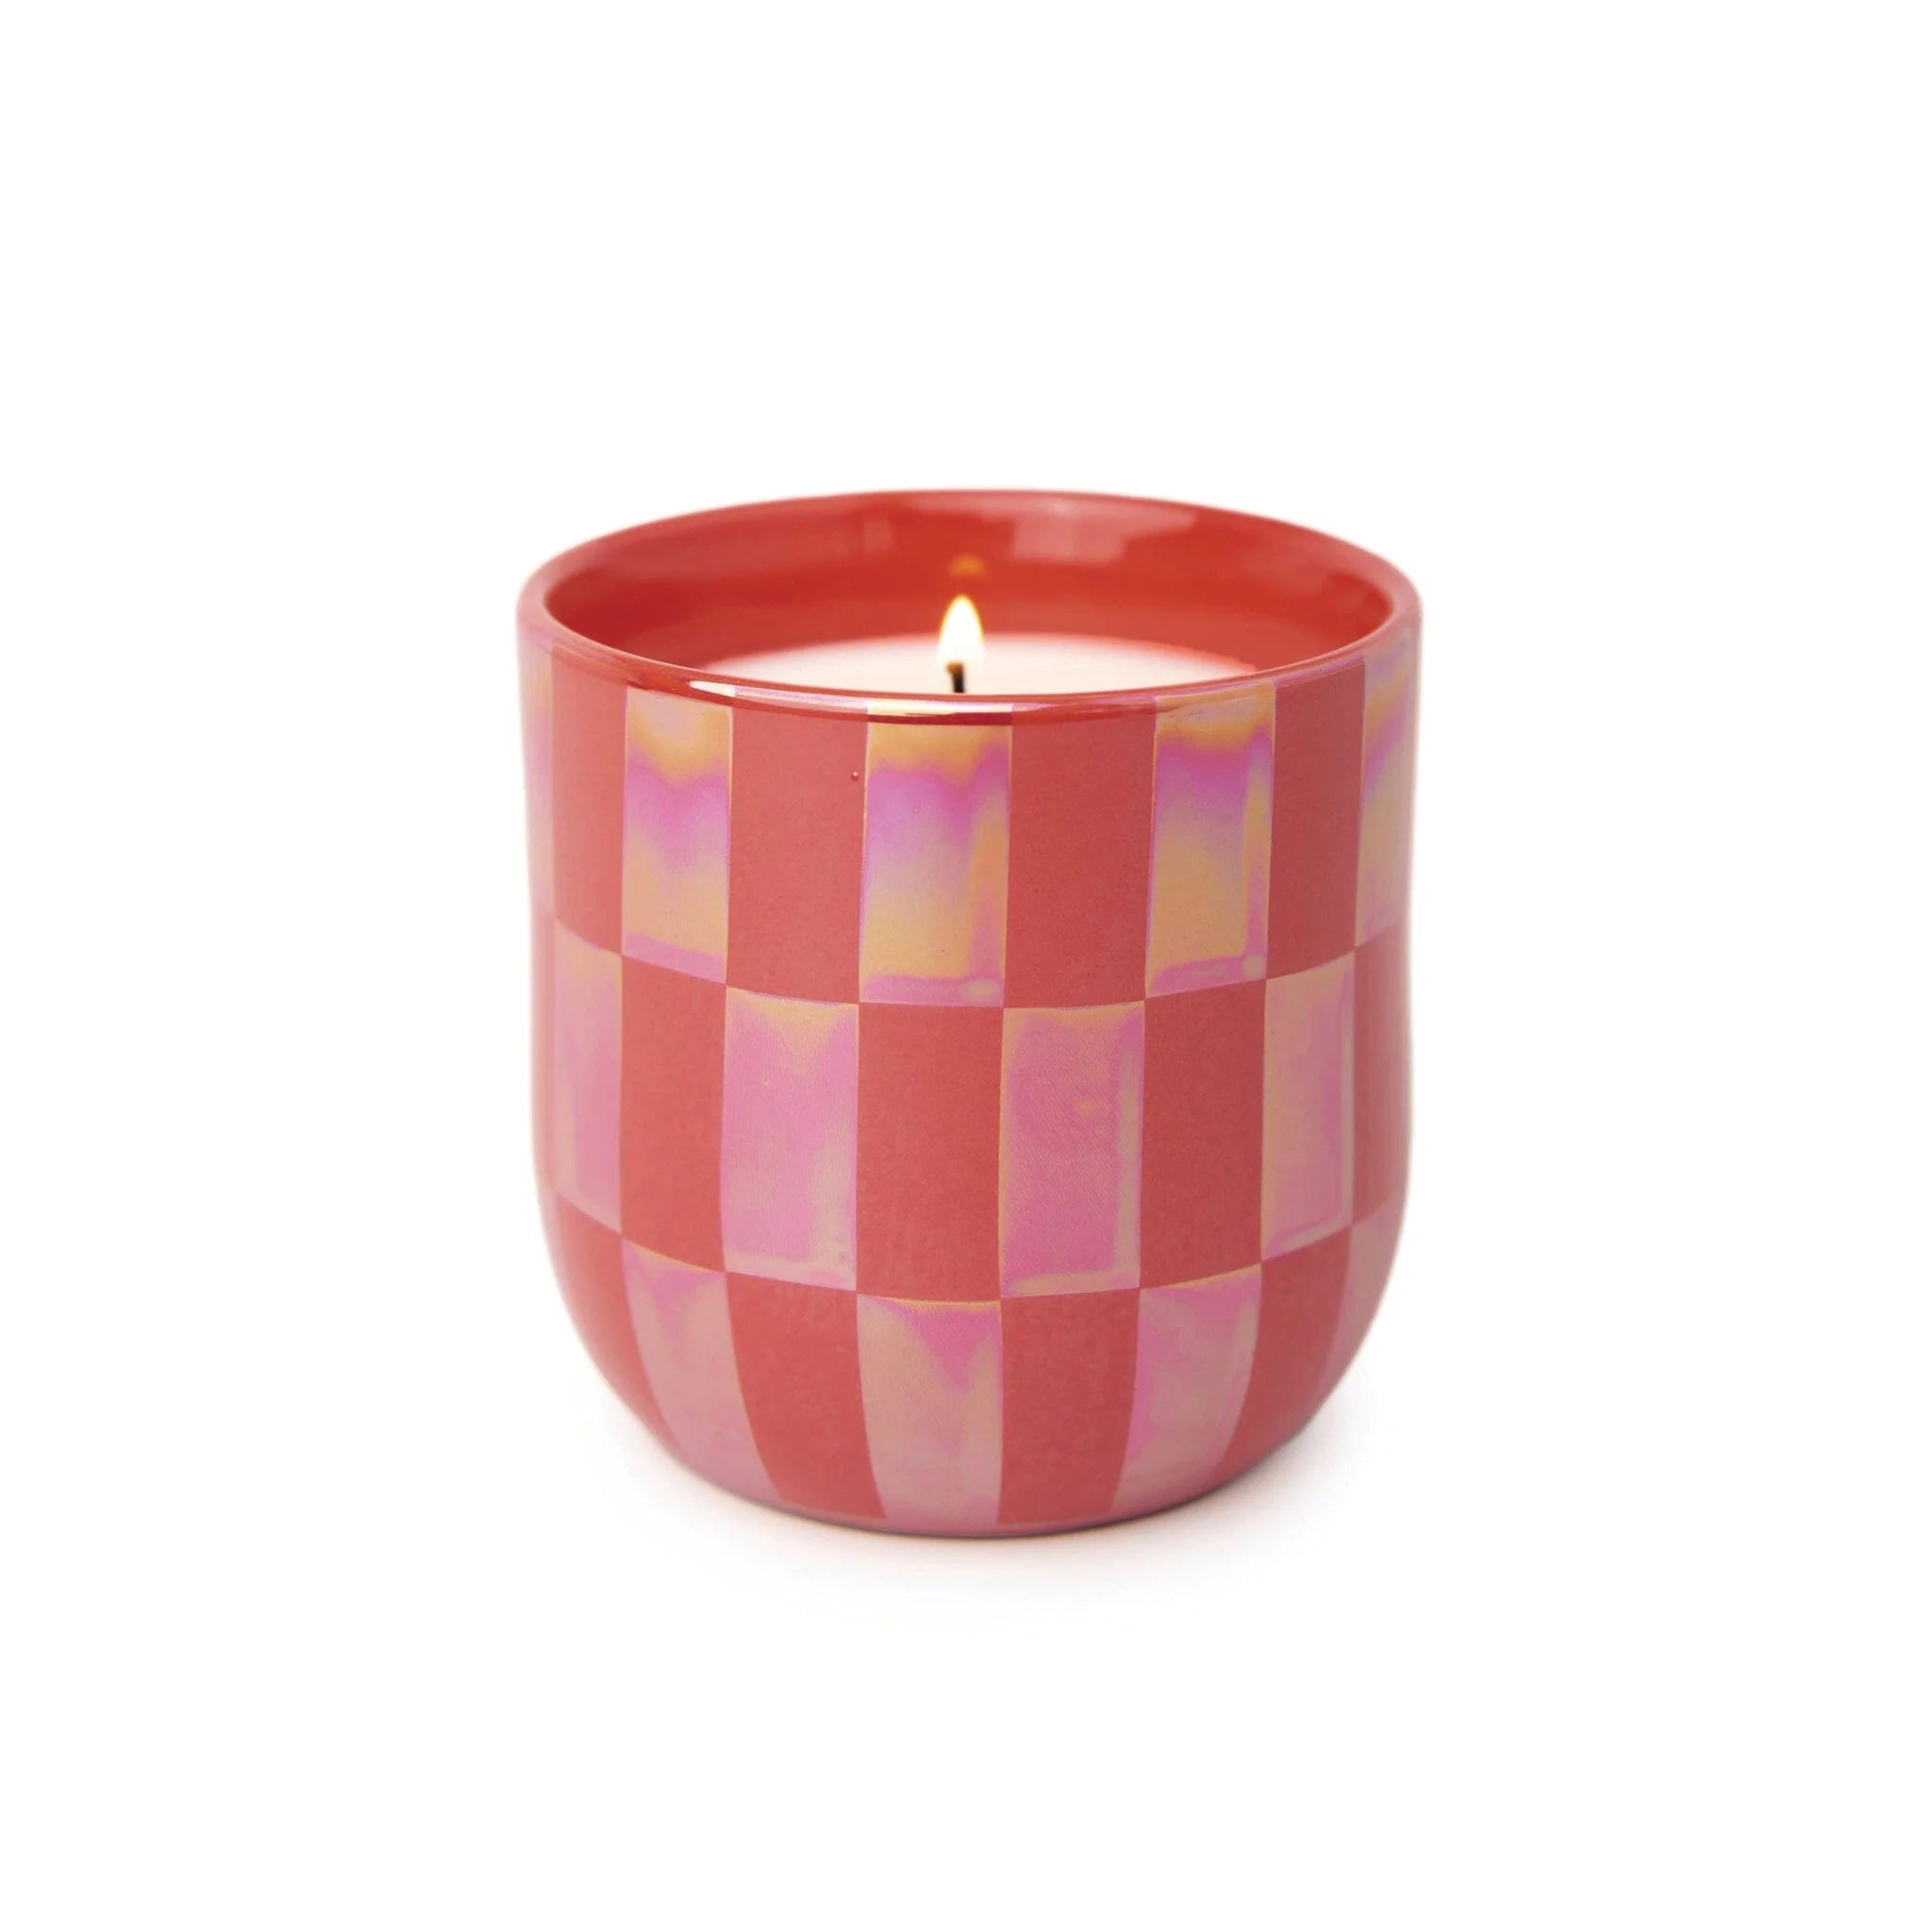 PADDYWAX - Lustre 10 oz. Candle - Cactus Flower